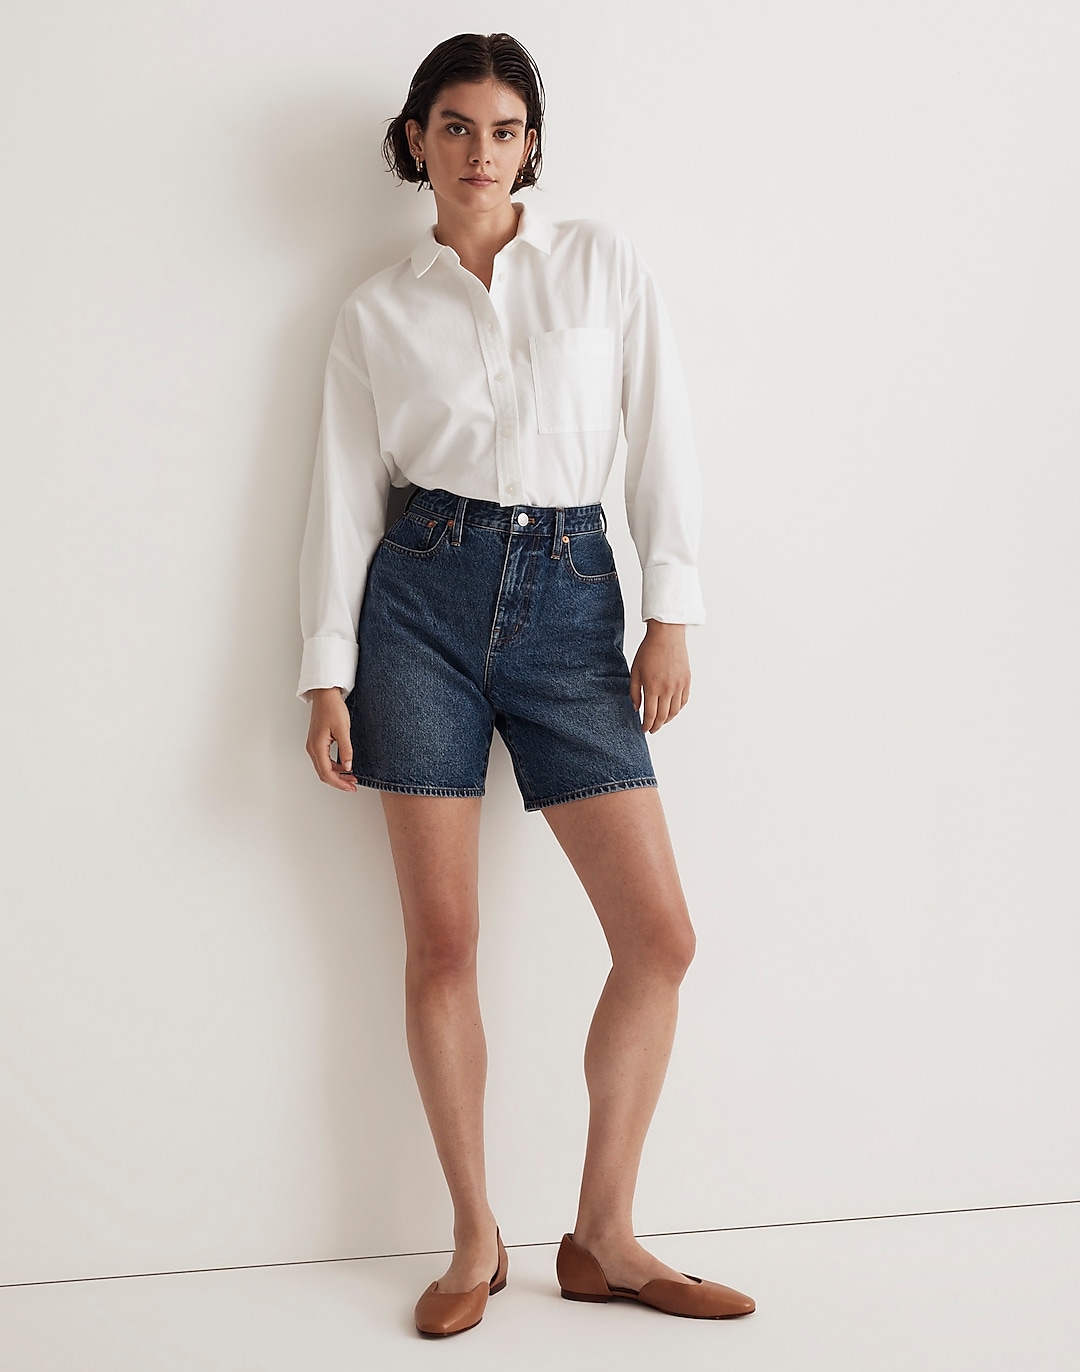 Baggy Jean Shorts in Valmont Wash | Madewell